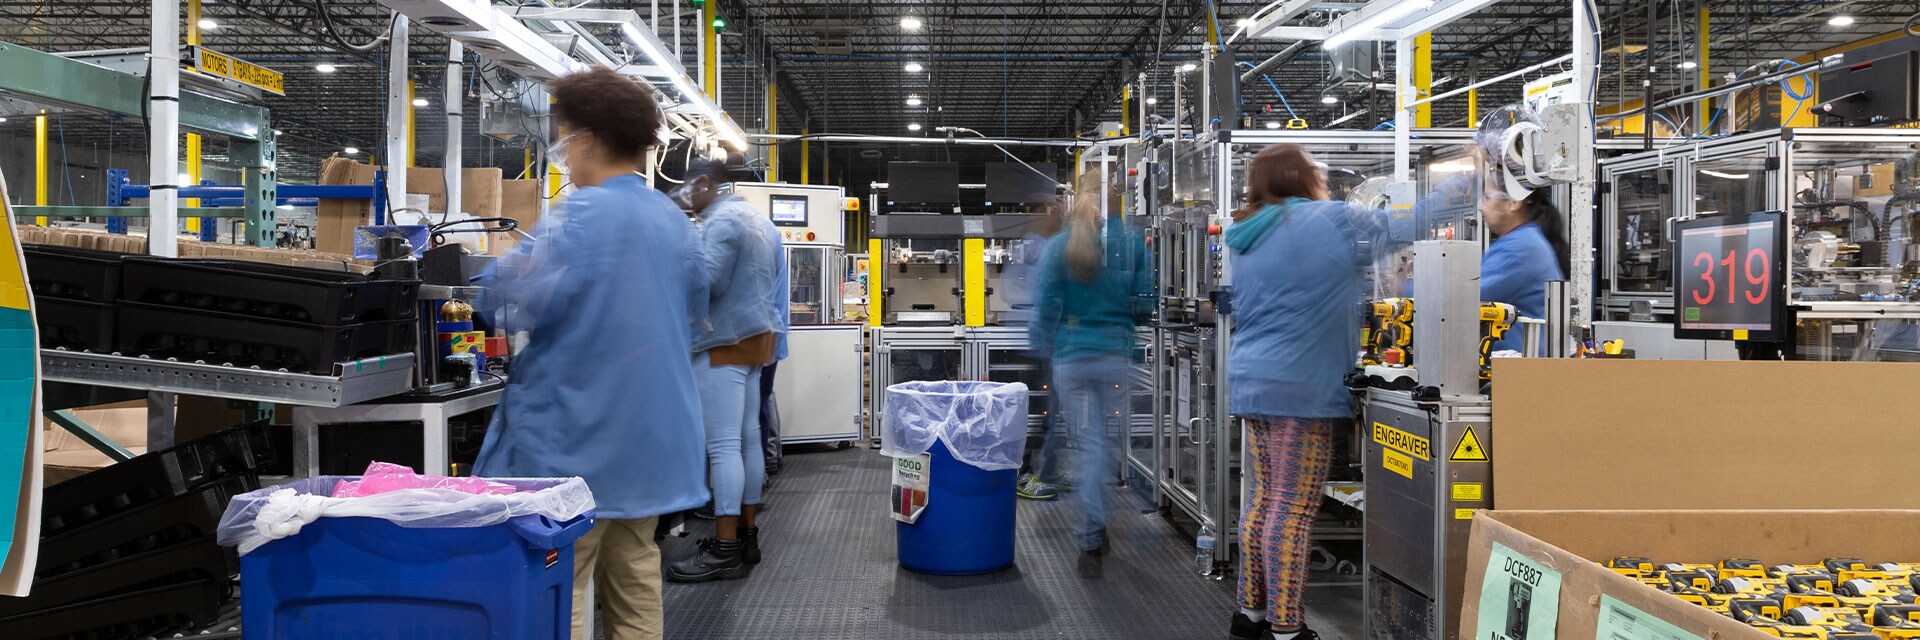 Stanley Black & Decker employees working in a facility